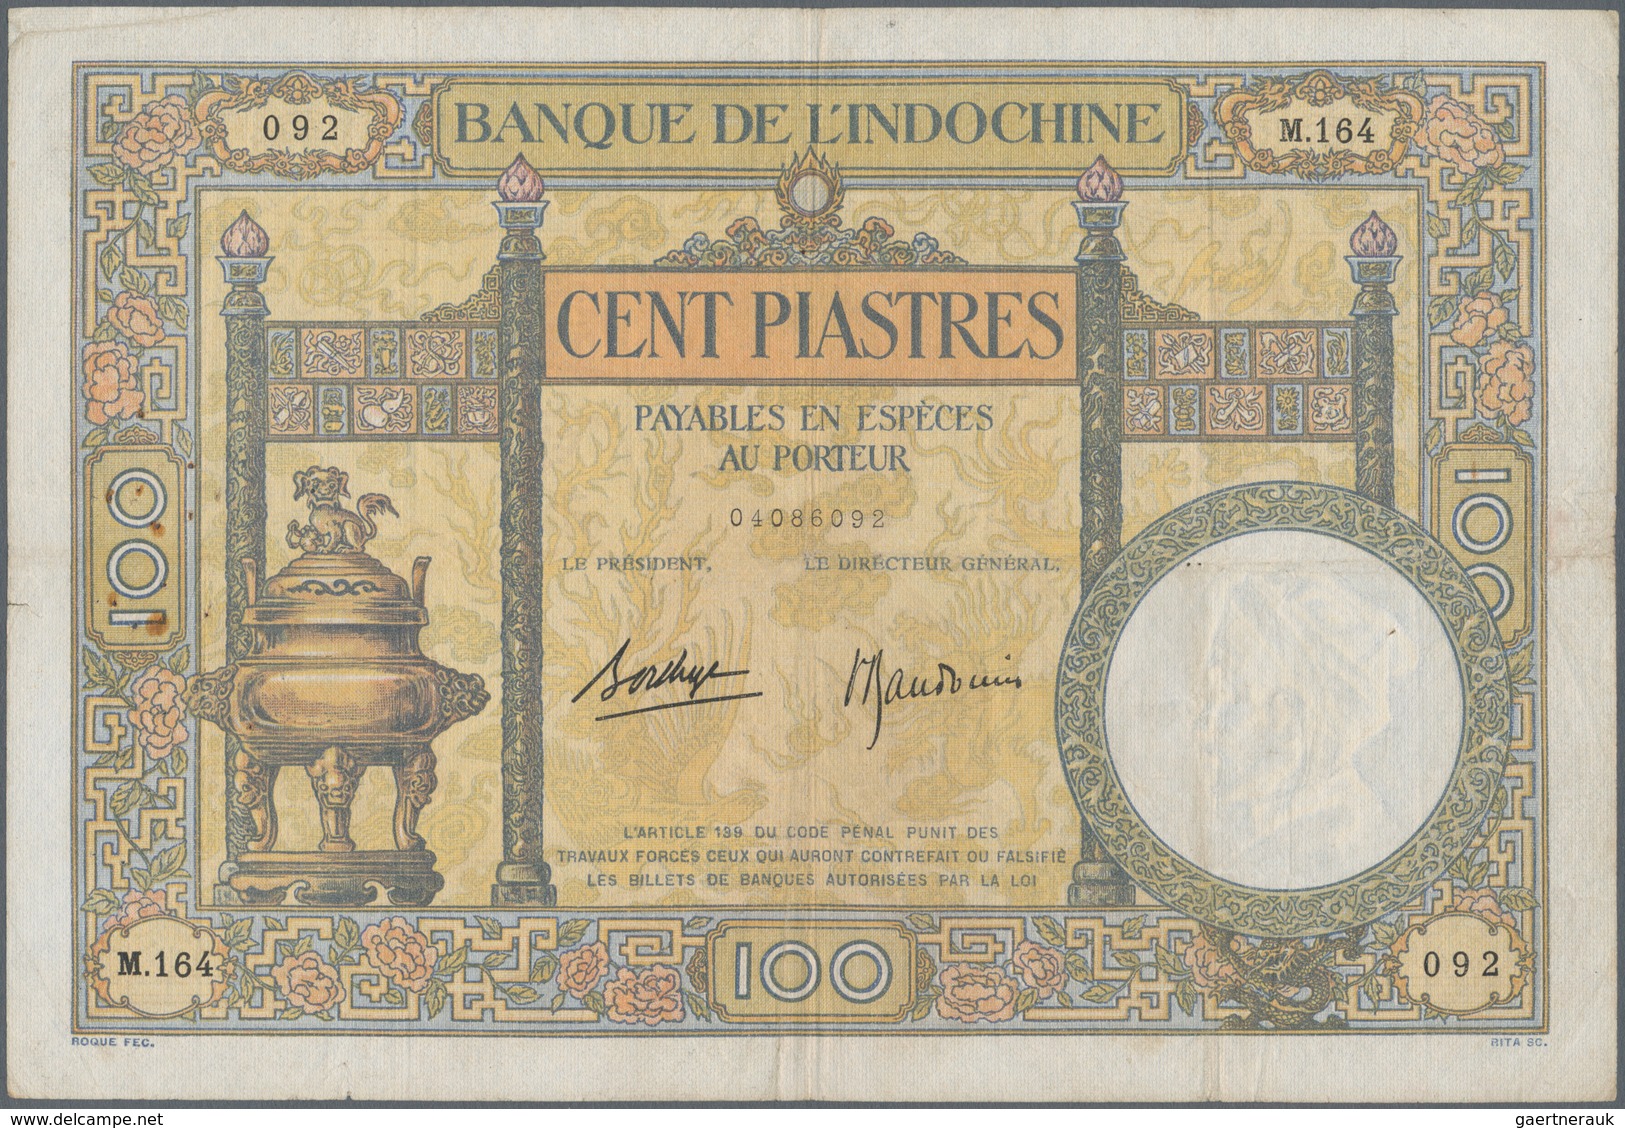 French Indochina / Französisch Indochina: 100 Piastres ND(1925-39) P. 51d, S/N 04086092 M.164, Used - Indochina